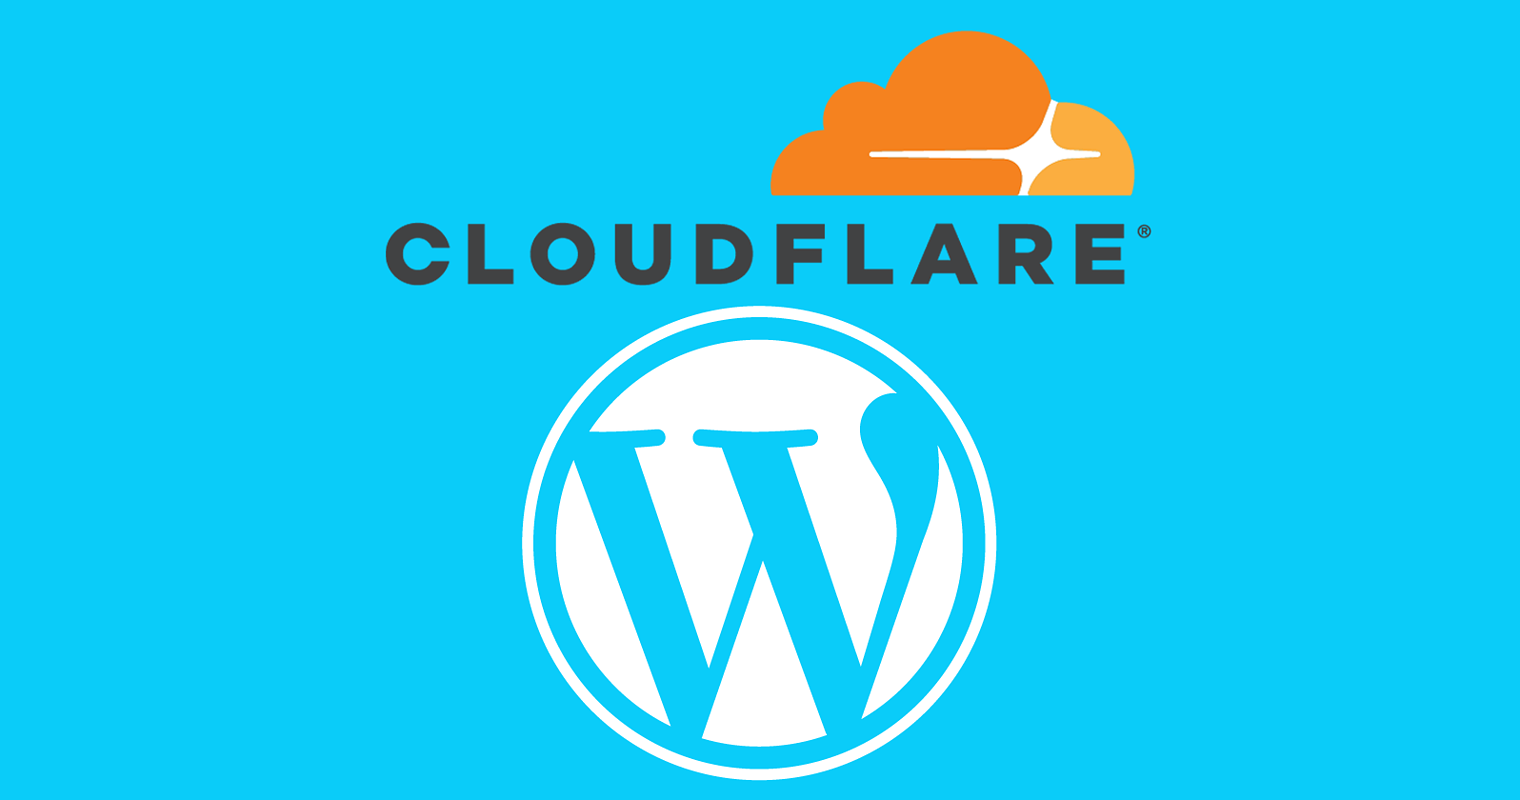 Cloudflare Announces WordPress Caching – Free to $5/month